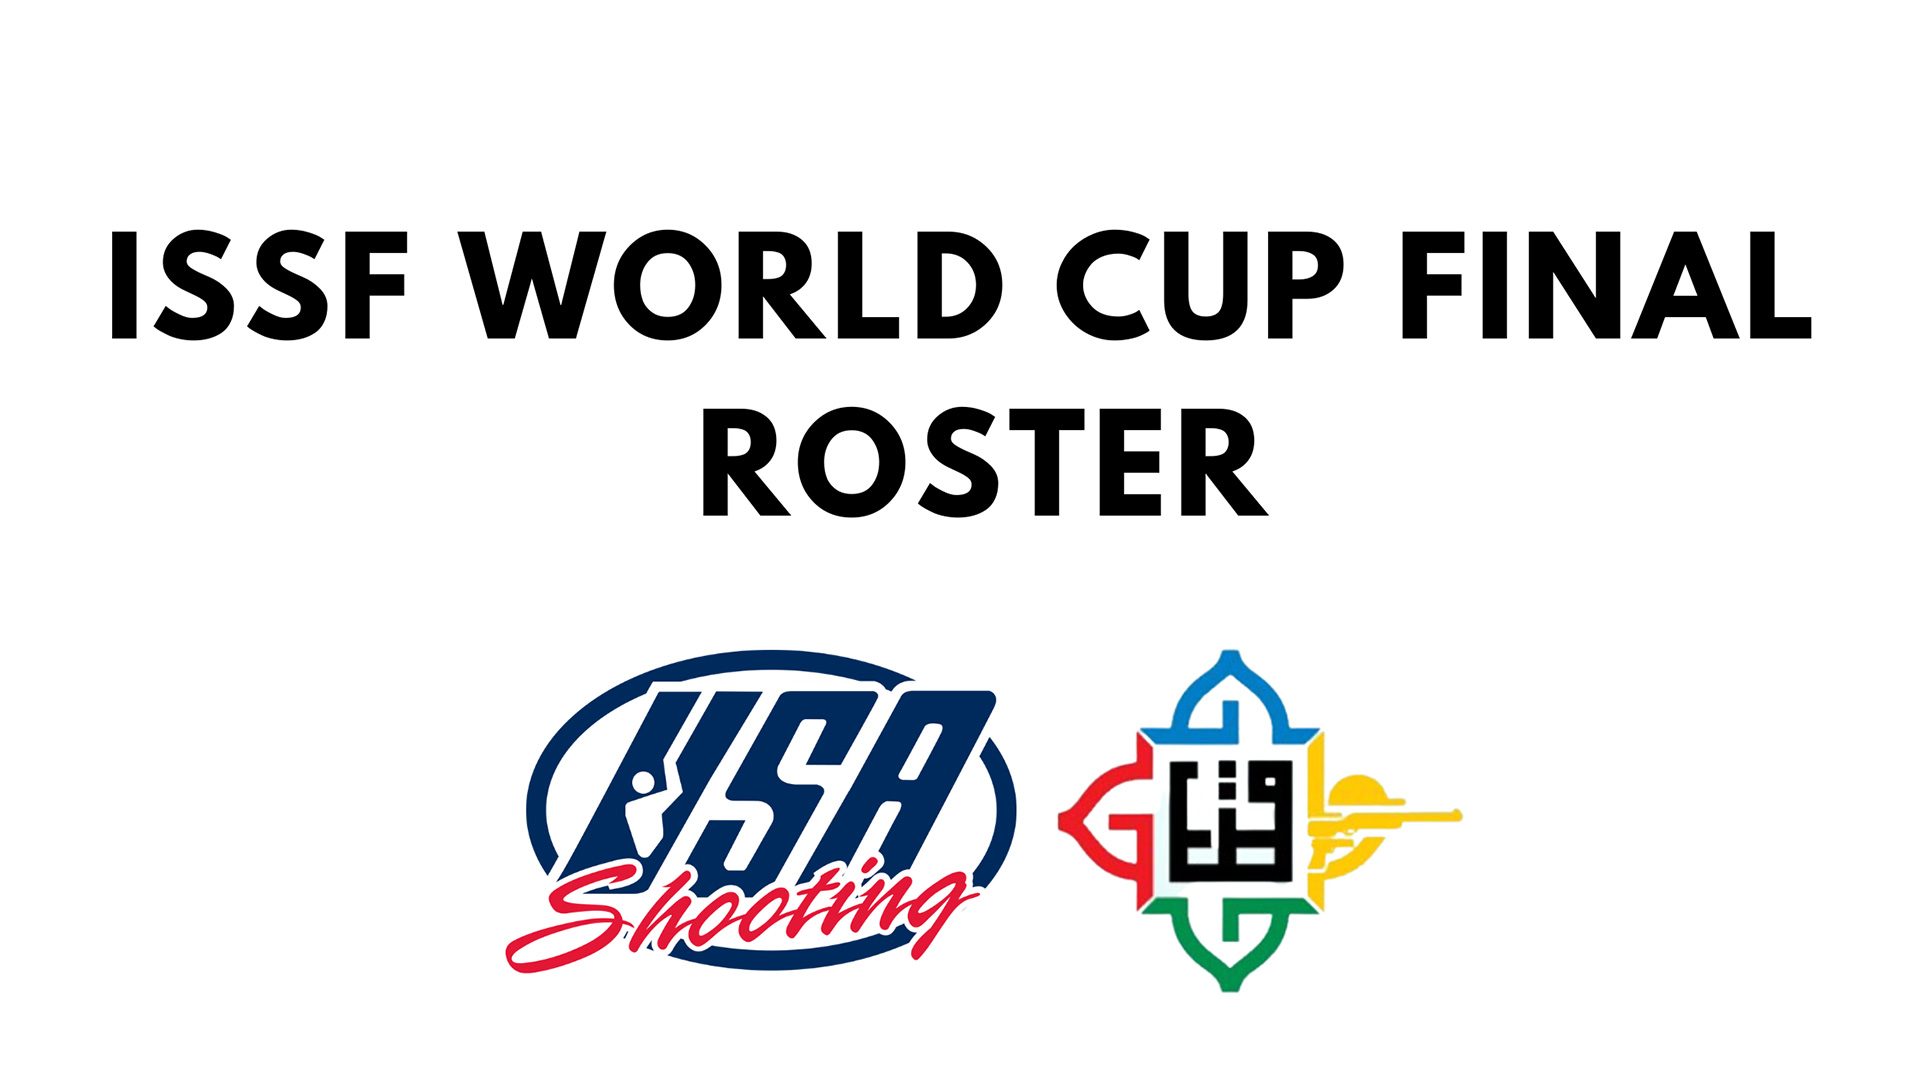 ISSF World Cup Final U.S. Roster